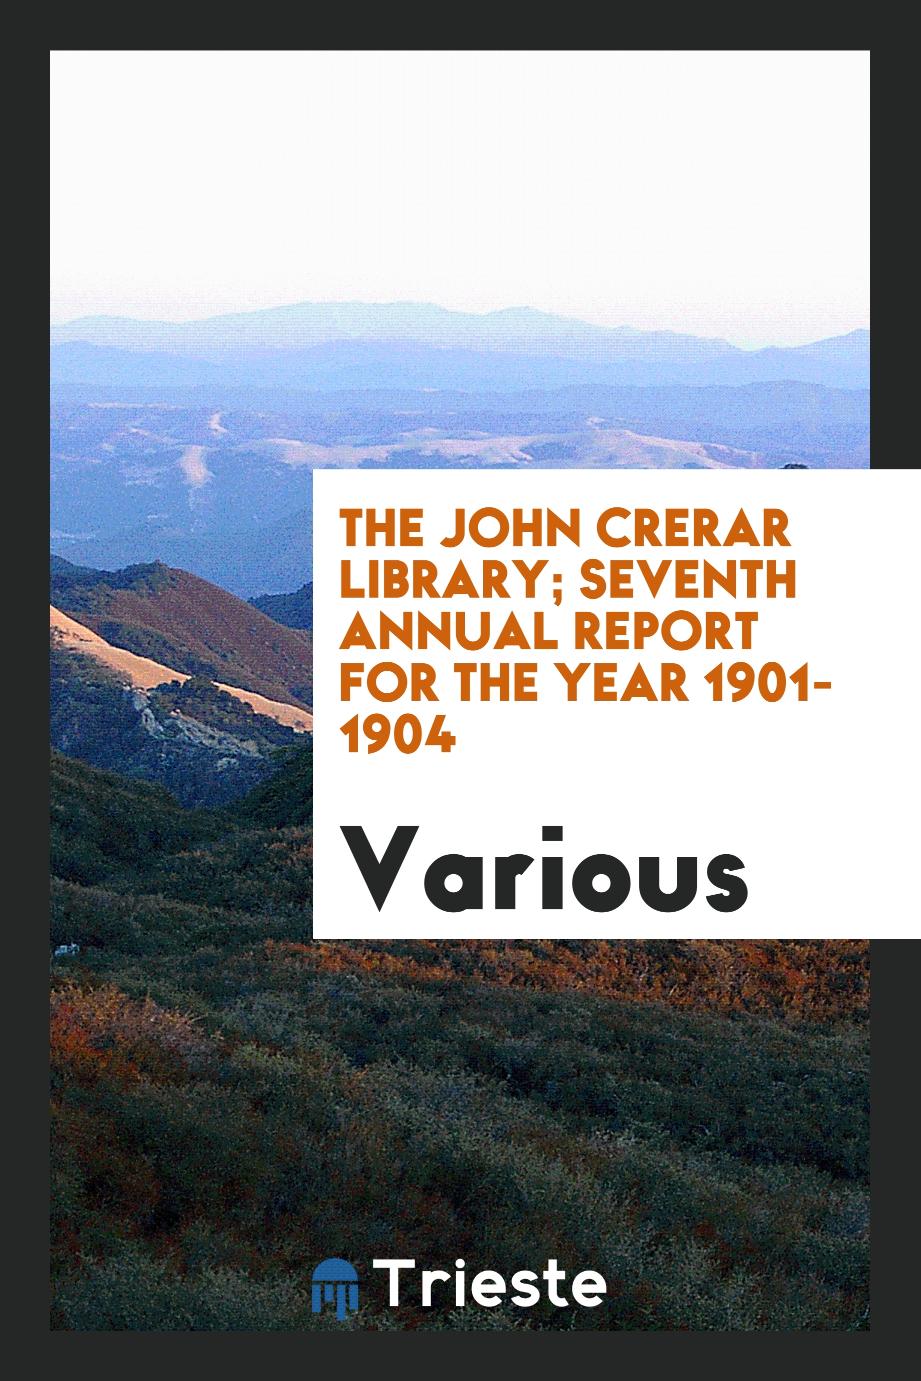 The John Crerar Library; seventh annual report for the year 1901-1904